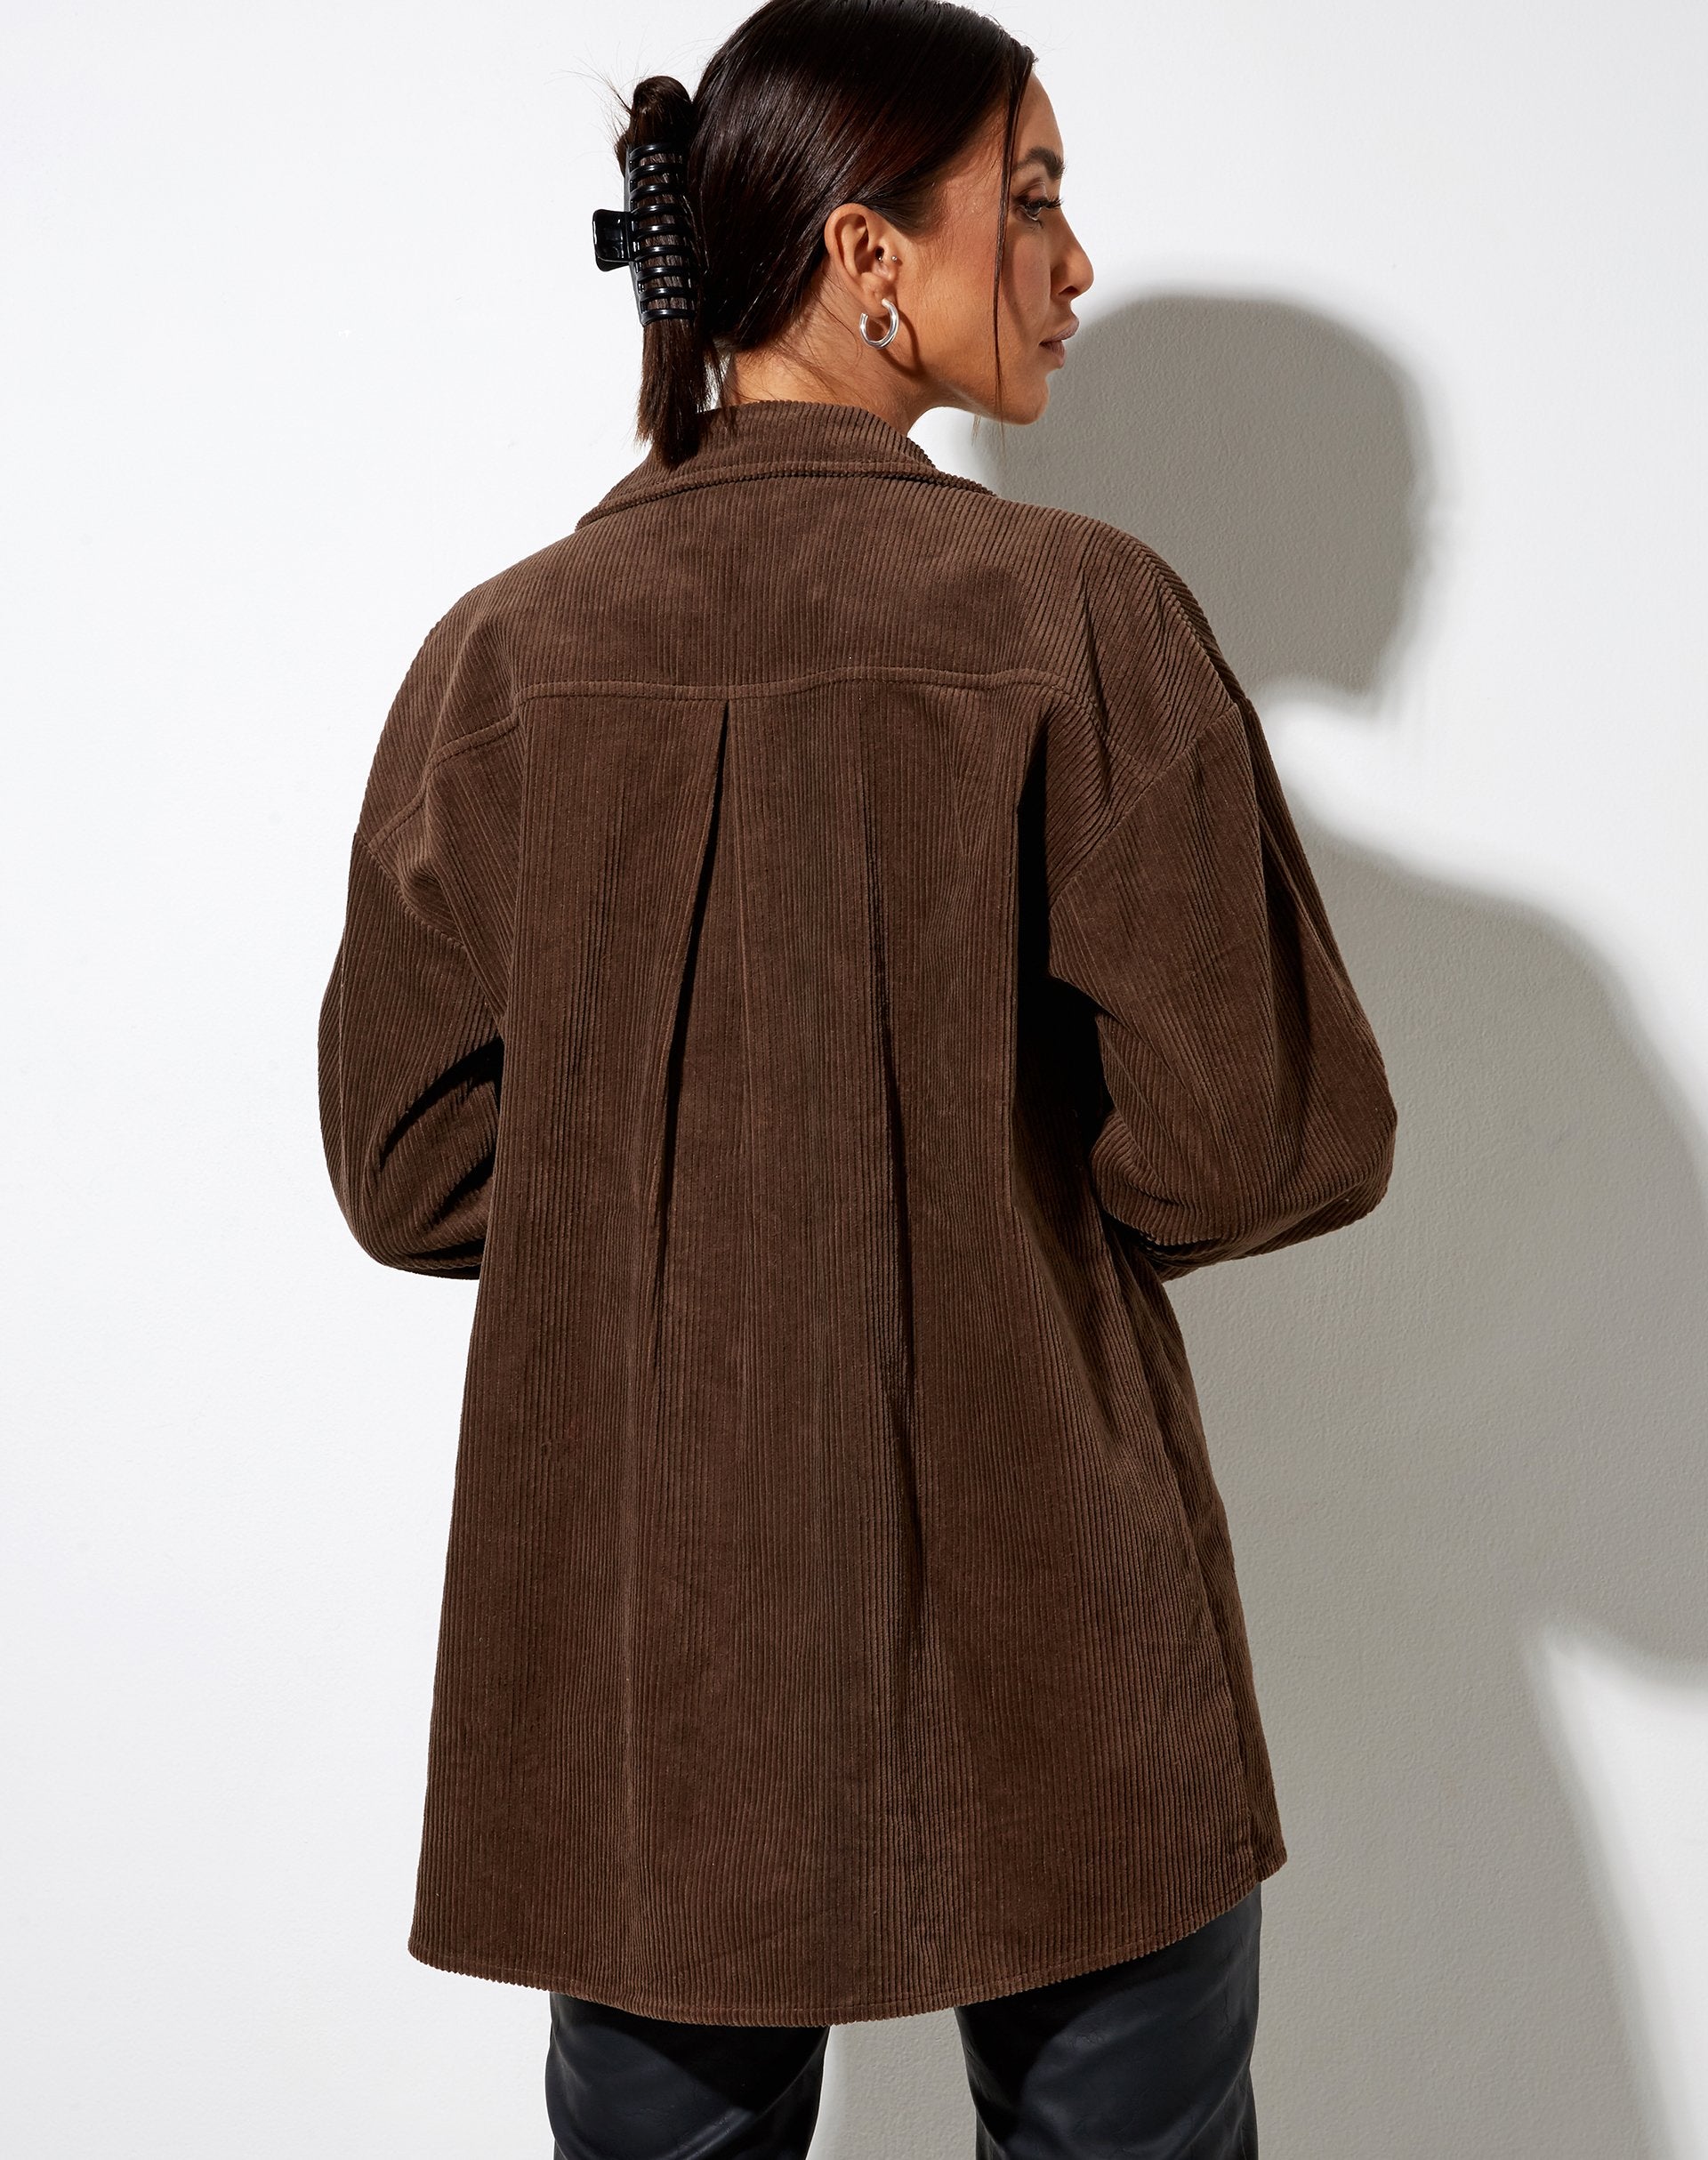 Image of Marcy Shirt in Corduroy Brown